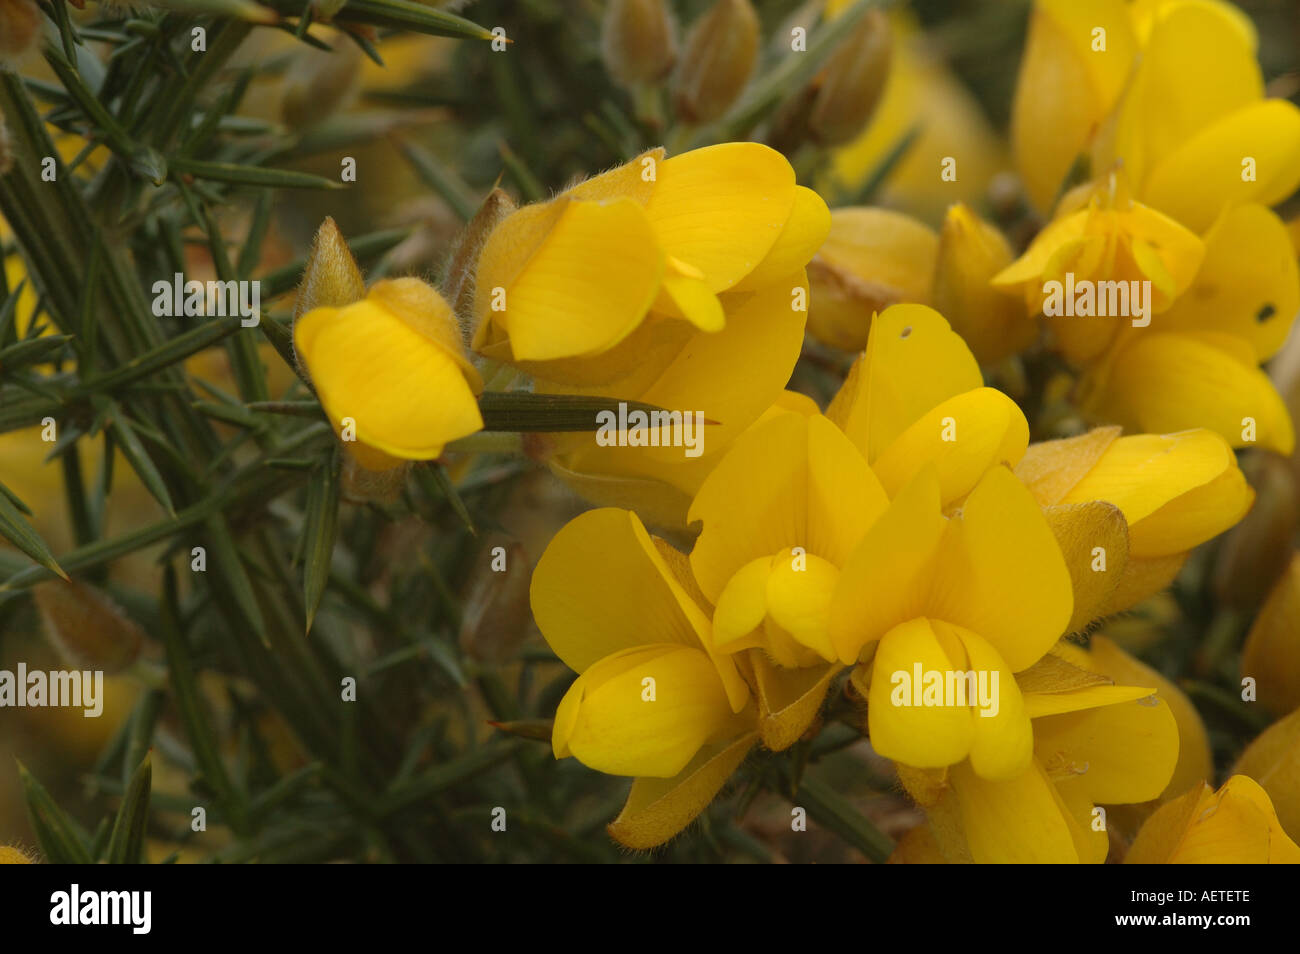 Yellow pea like flowers and spikey leaves of Common Gorse Stock Photo